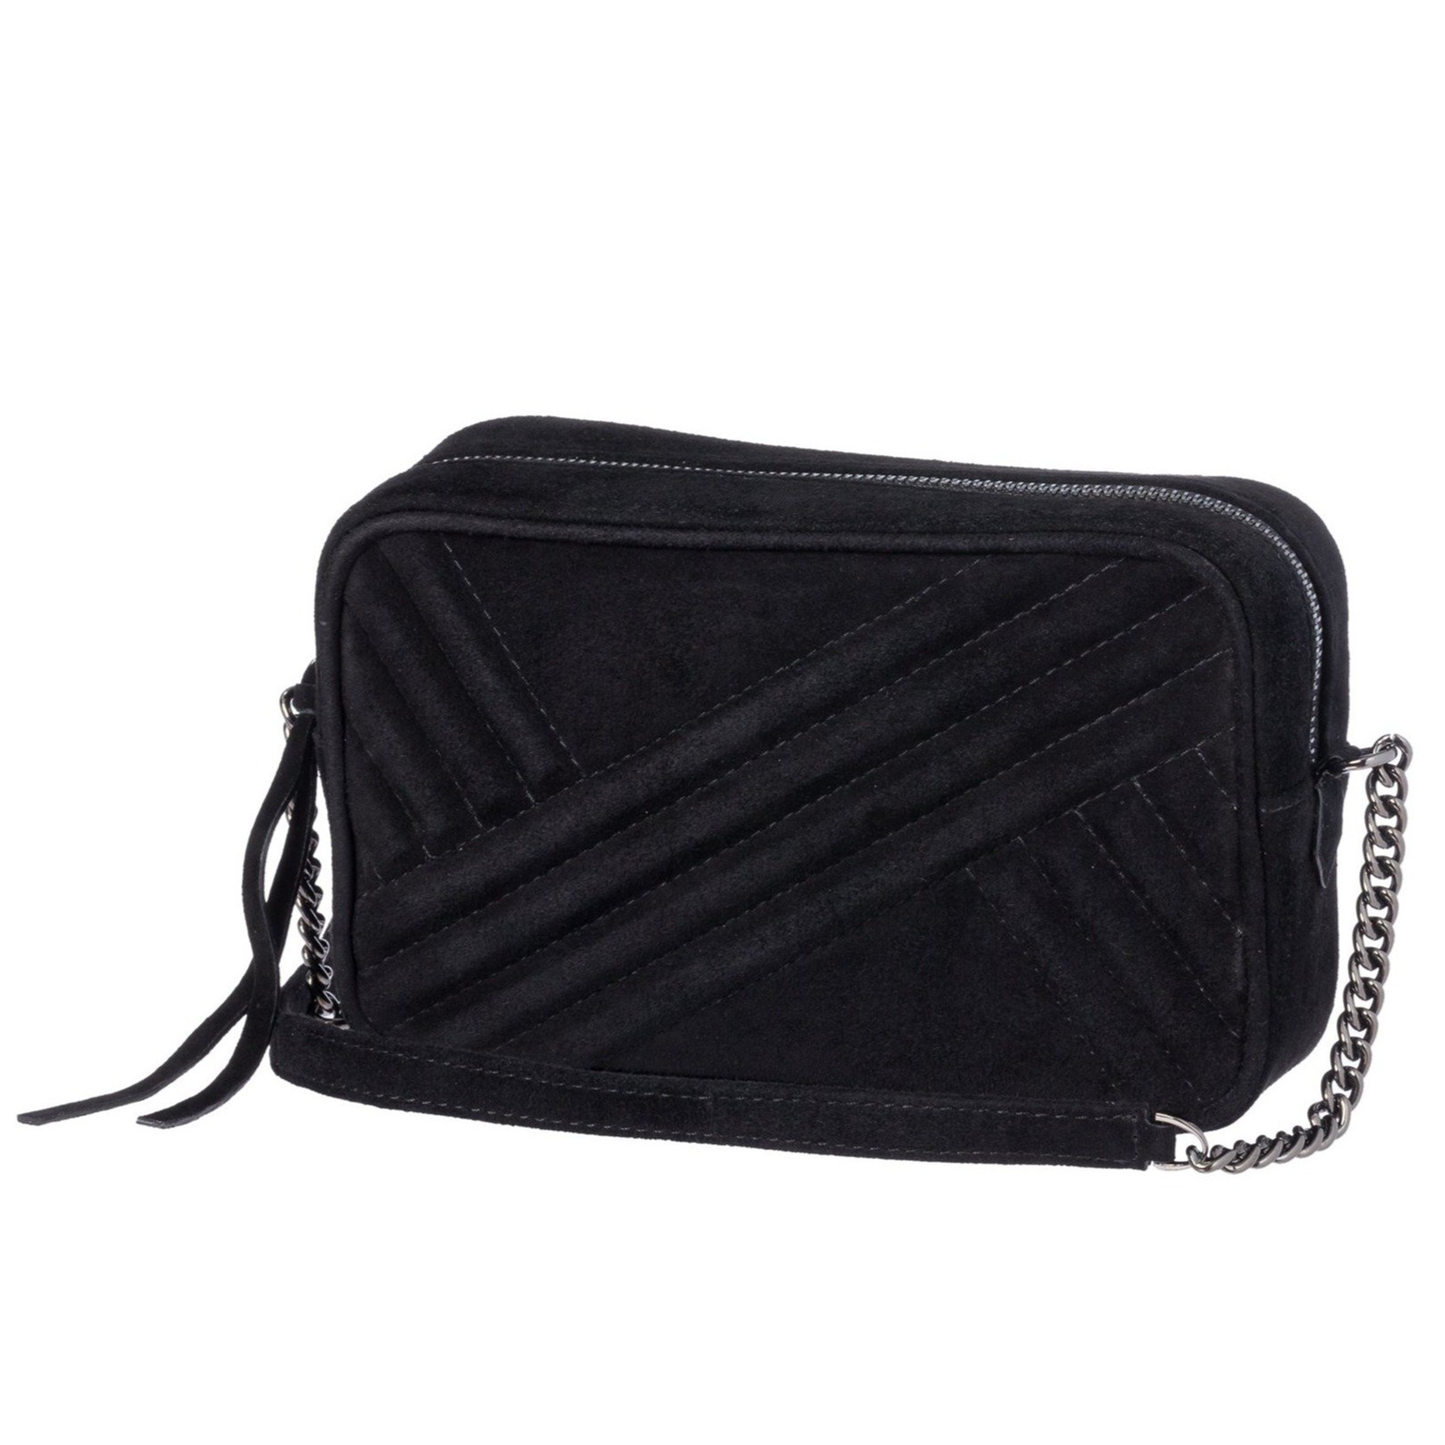 Load image into Gallery viewer, Handbag in Black Suede Leather
